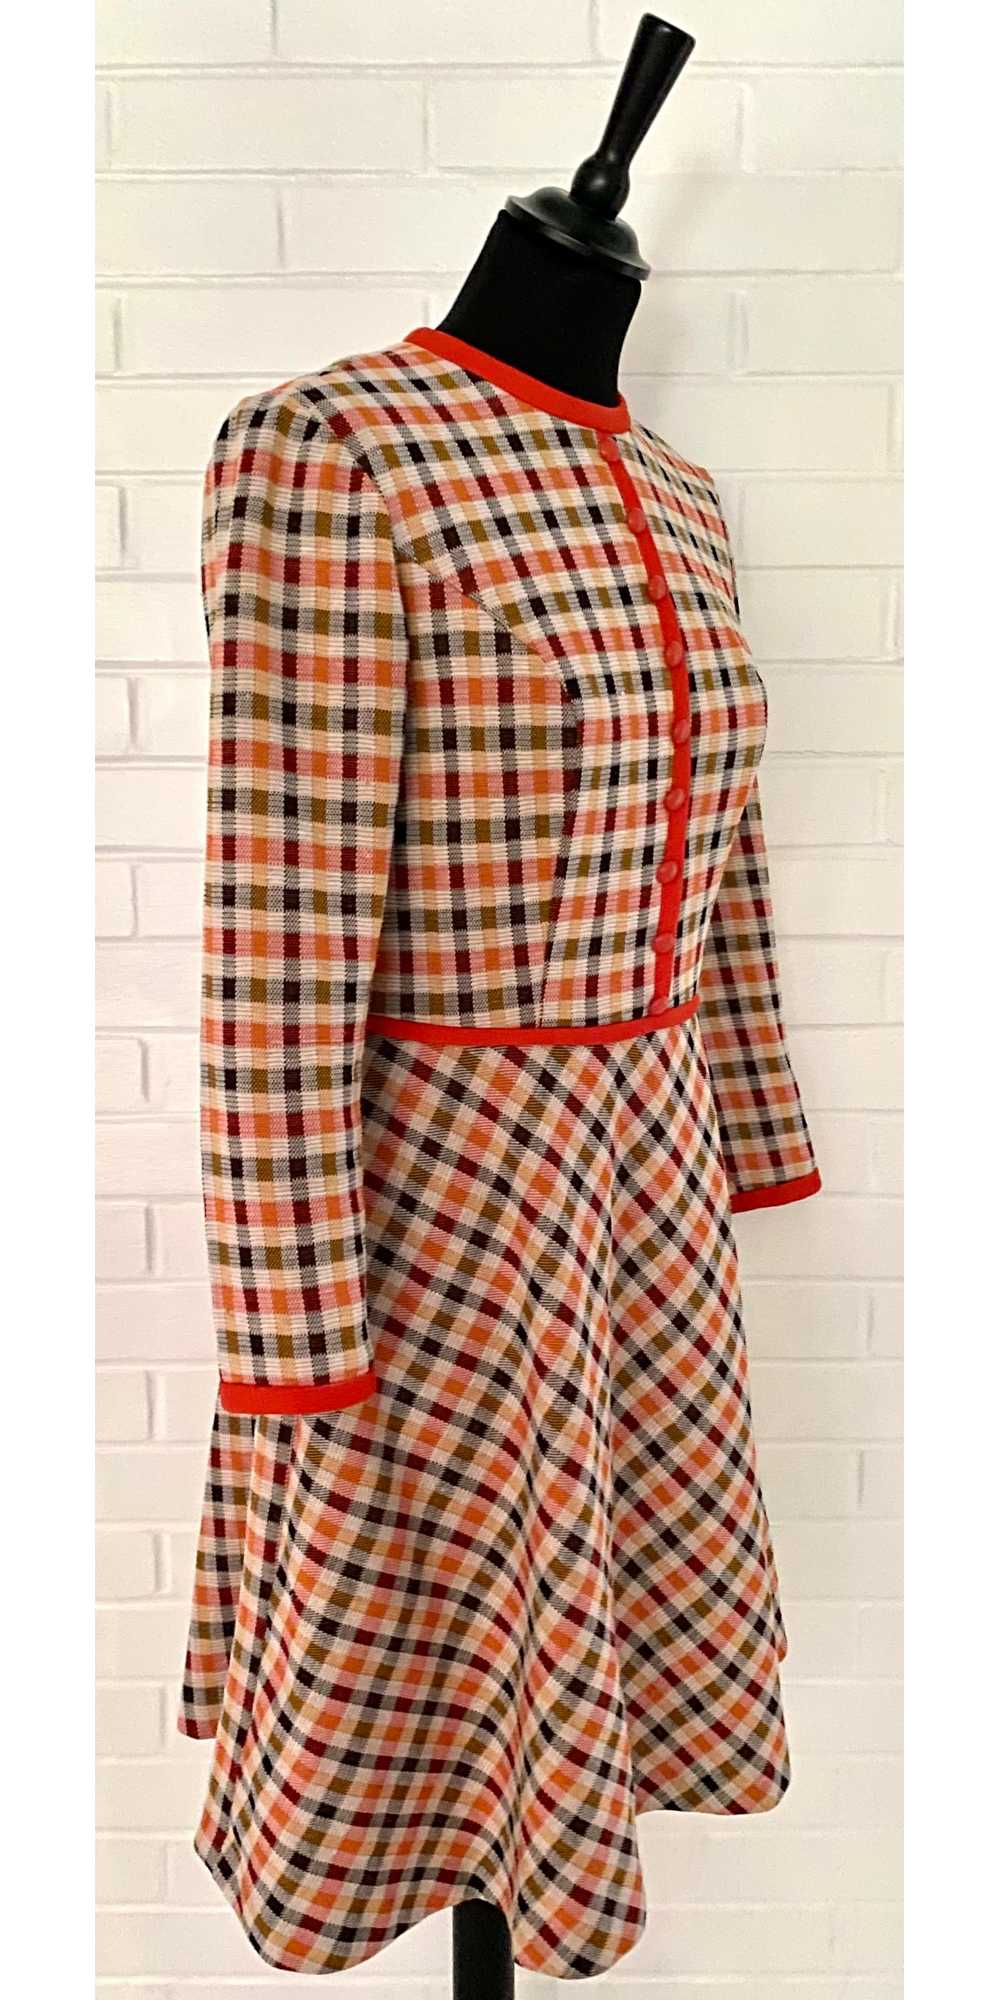 Late 60s/ Early 70s Bayberry Plaid Dress - image 5